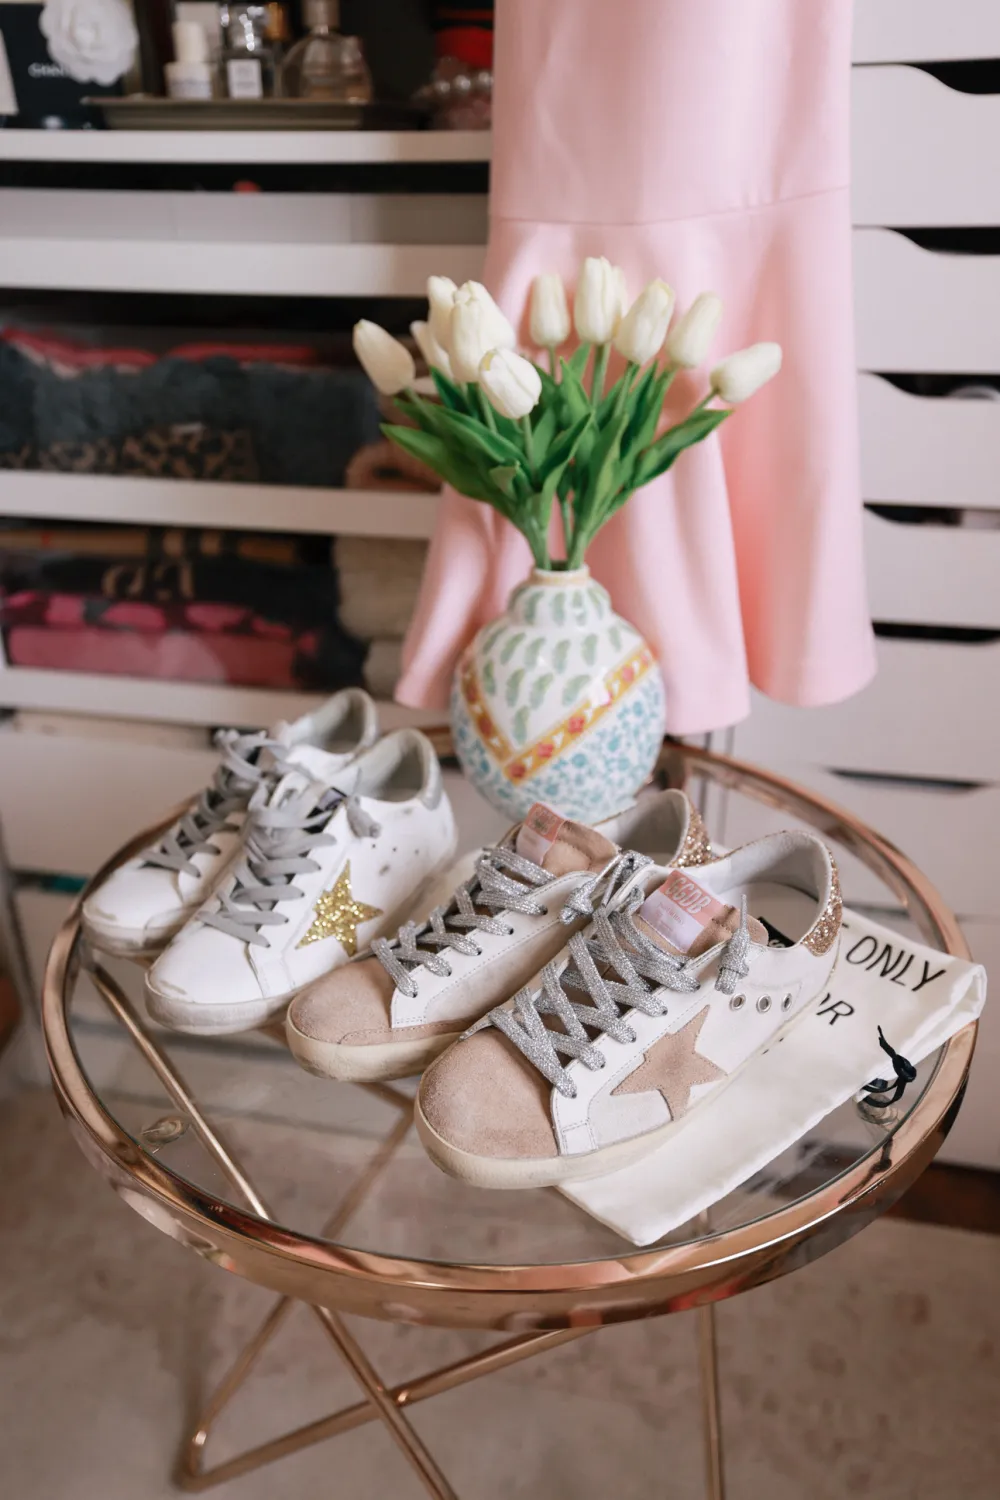 employees Golden Goose Sneakers began dealing with the fallout